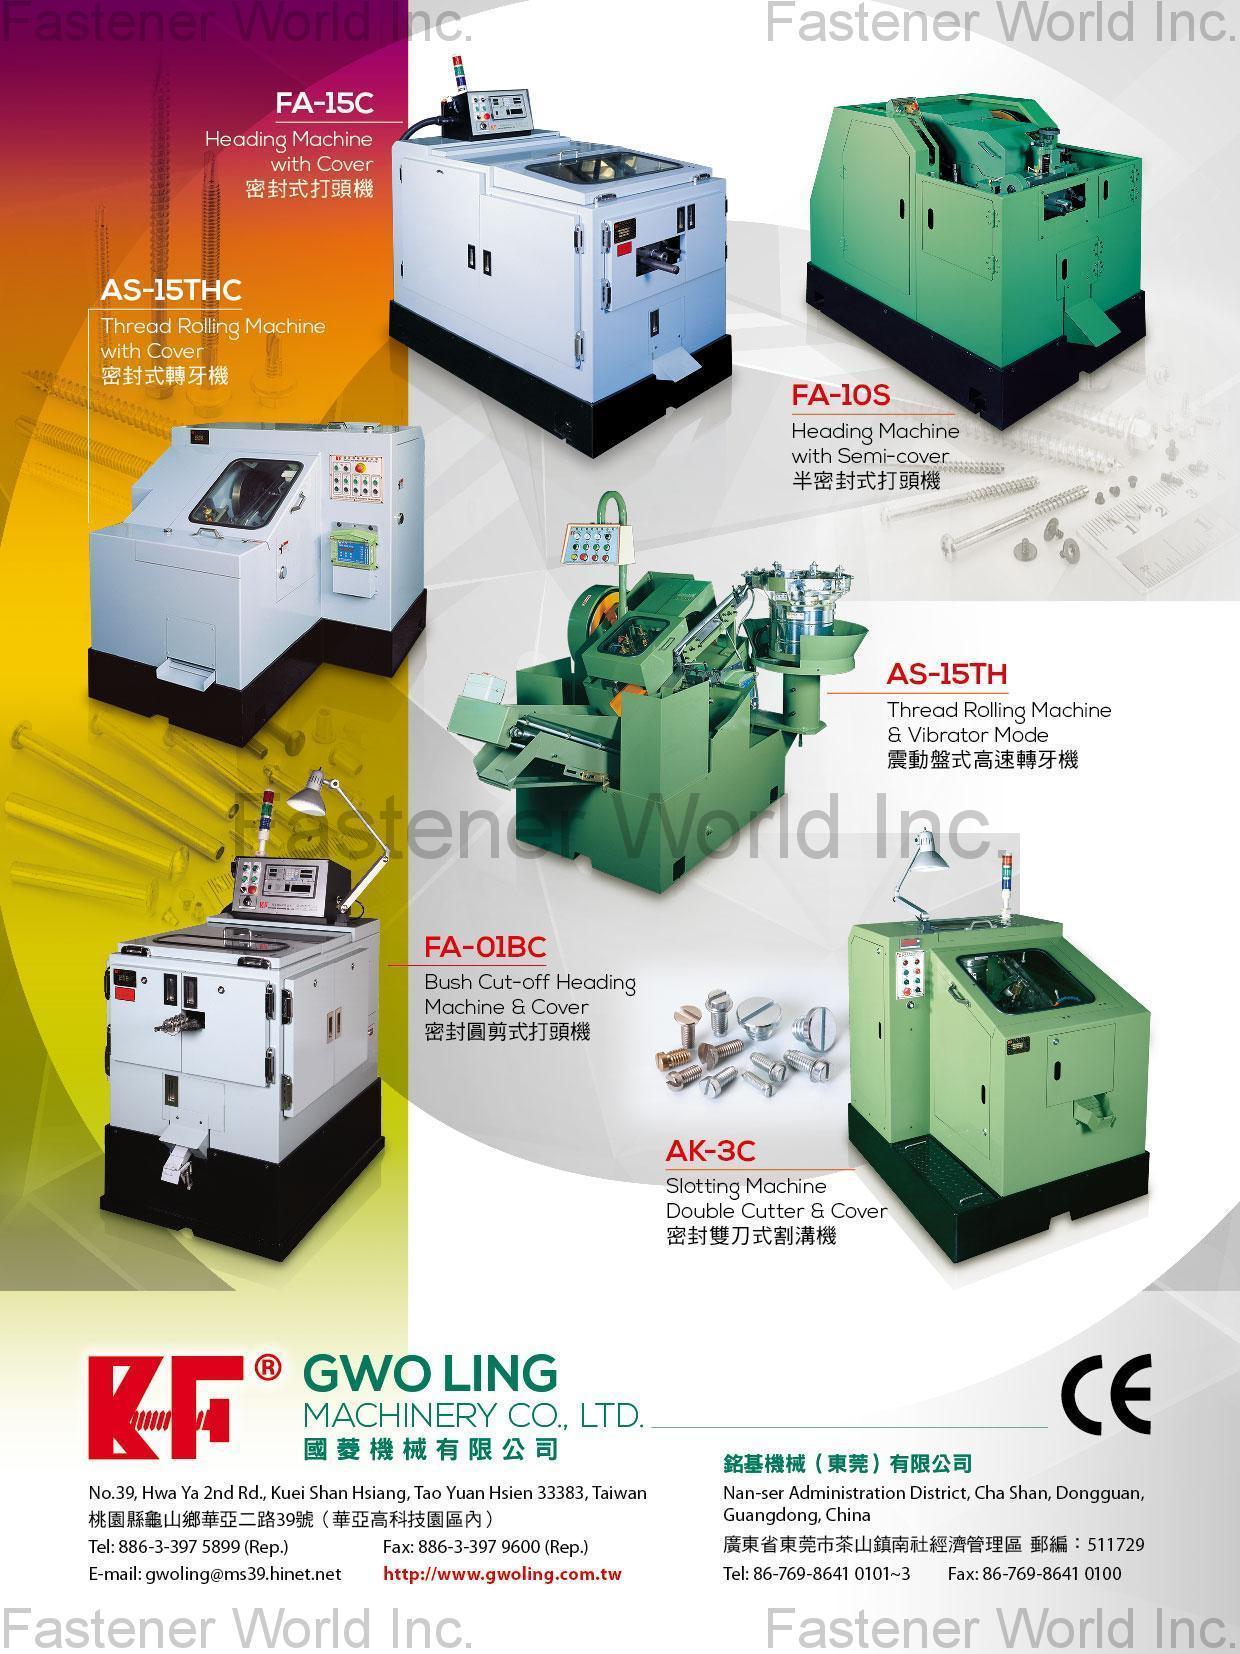 GWO LING MACHINERY CO., LTD.  , FA-15C Heading Machine with Cover AS-15THC Thread Rolling Machine with Cover FA-10S Heading Machine with Semi-cover AS-15TH Thread Rolling Machine & Vibrator Mode AK-3C Soltting Machine Double Cutter & Cover FA-01BC Bush Cut-off Heading Machine & Cover , Heading Machine